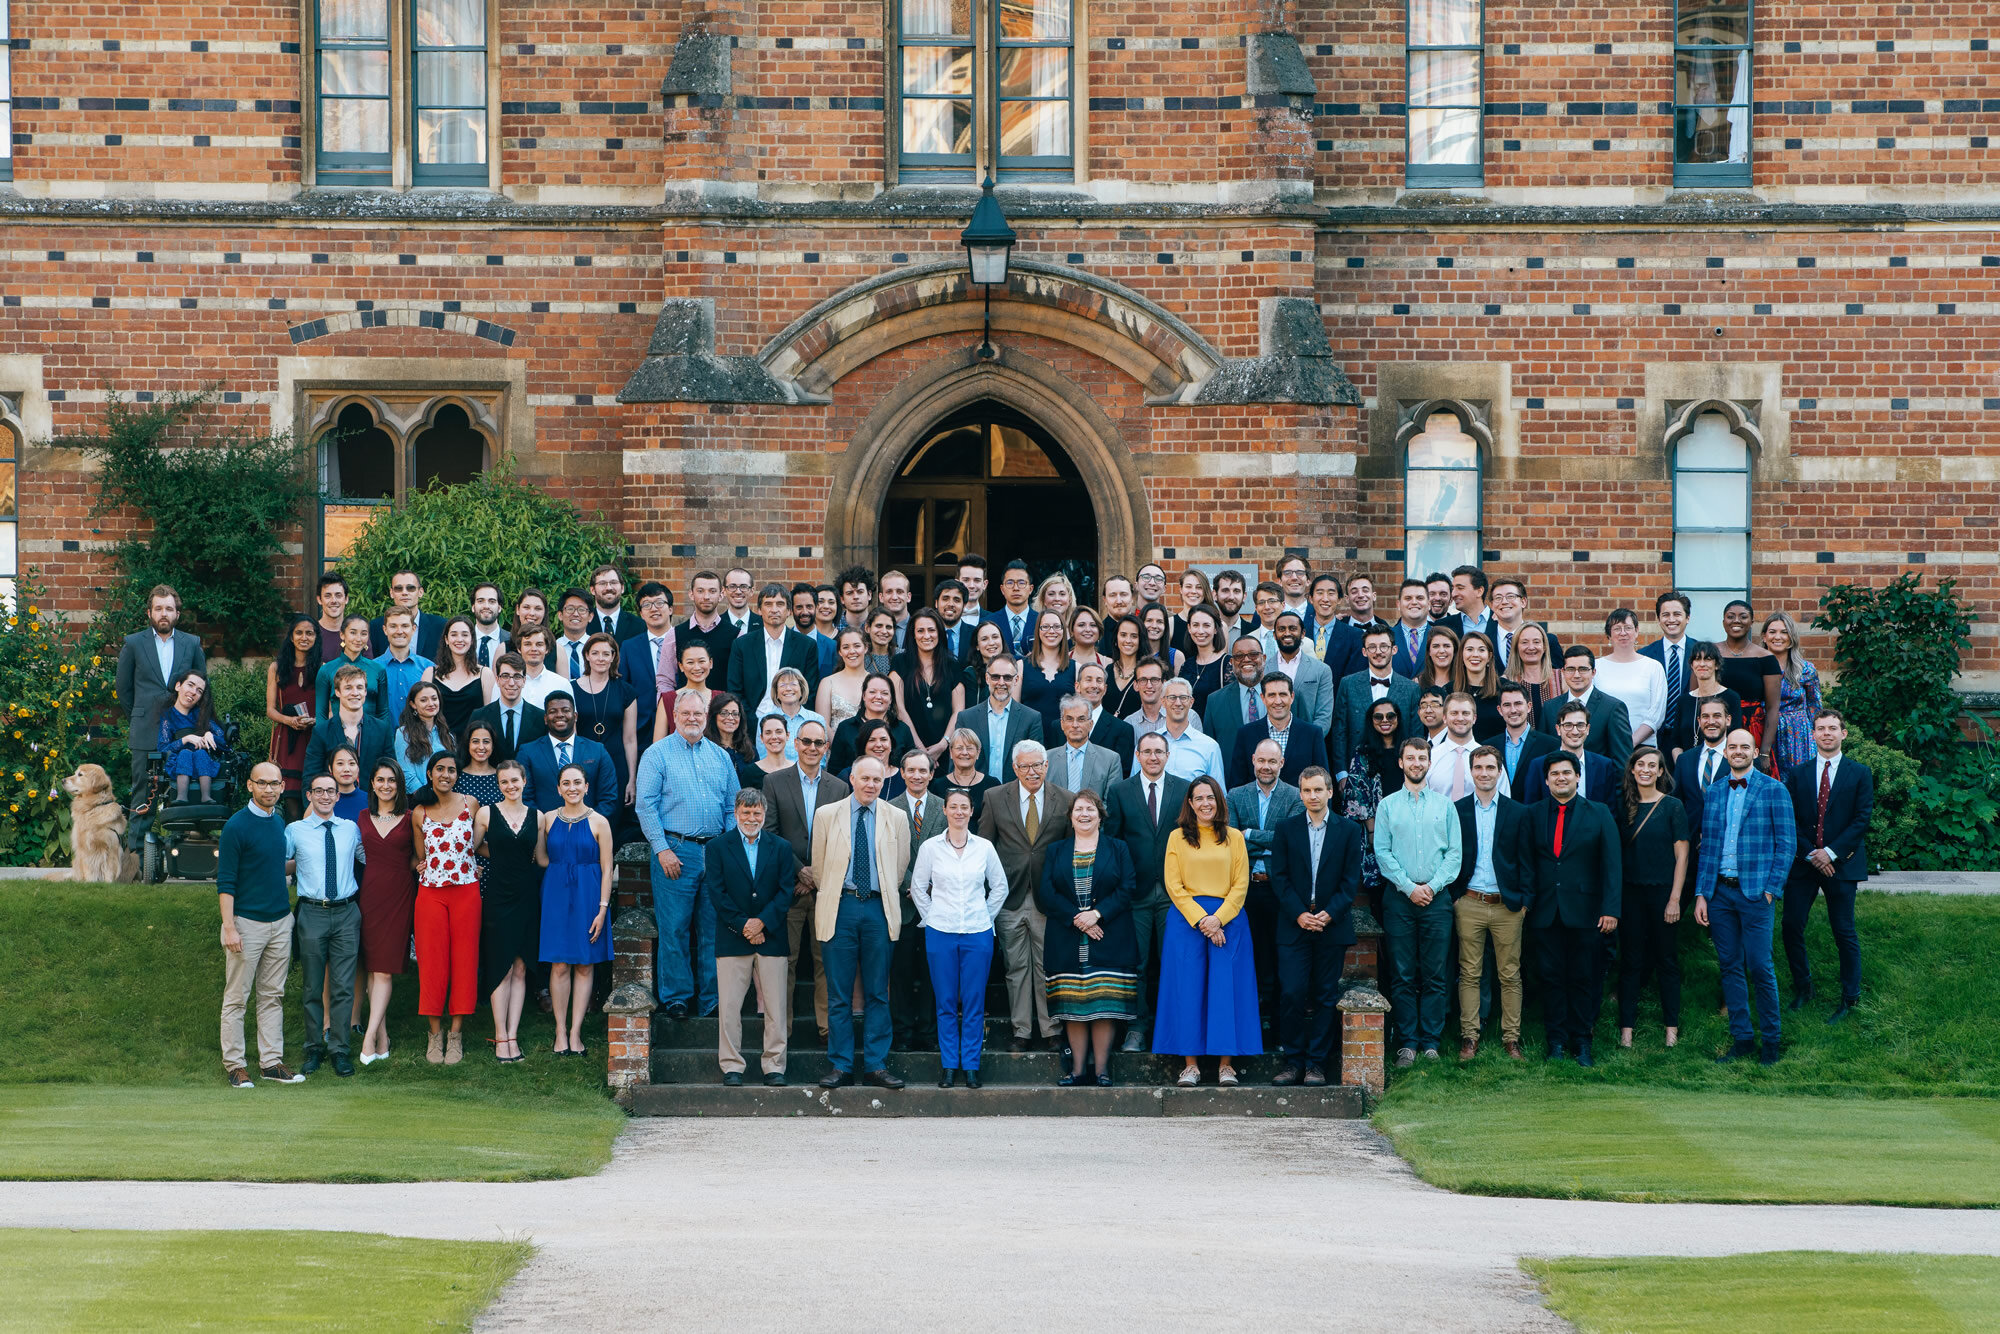 NIH Oxford-Cambridge Scholars and Wellcome Trust Programme’s Annual Research Workshop 2019